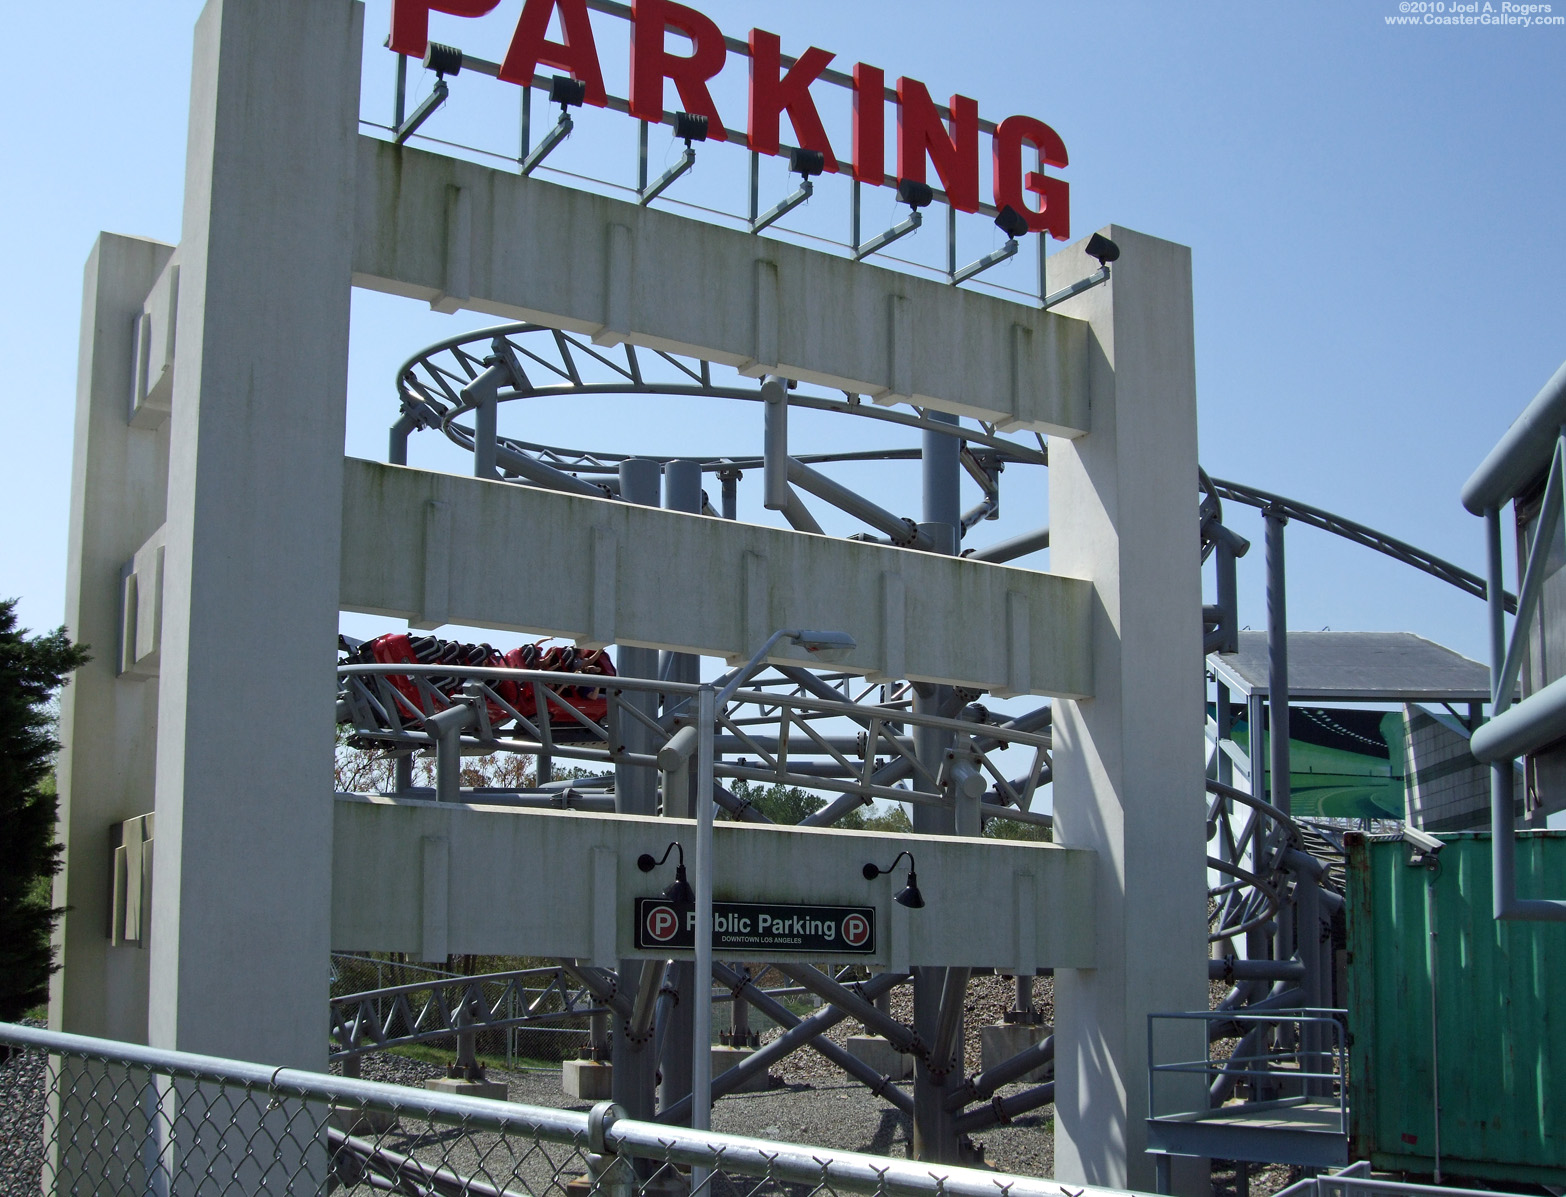 Cars racing through a parking garage - roller coaster built by Premier Rides